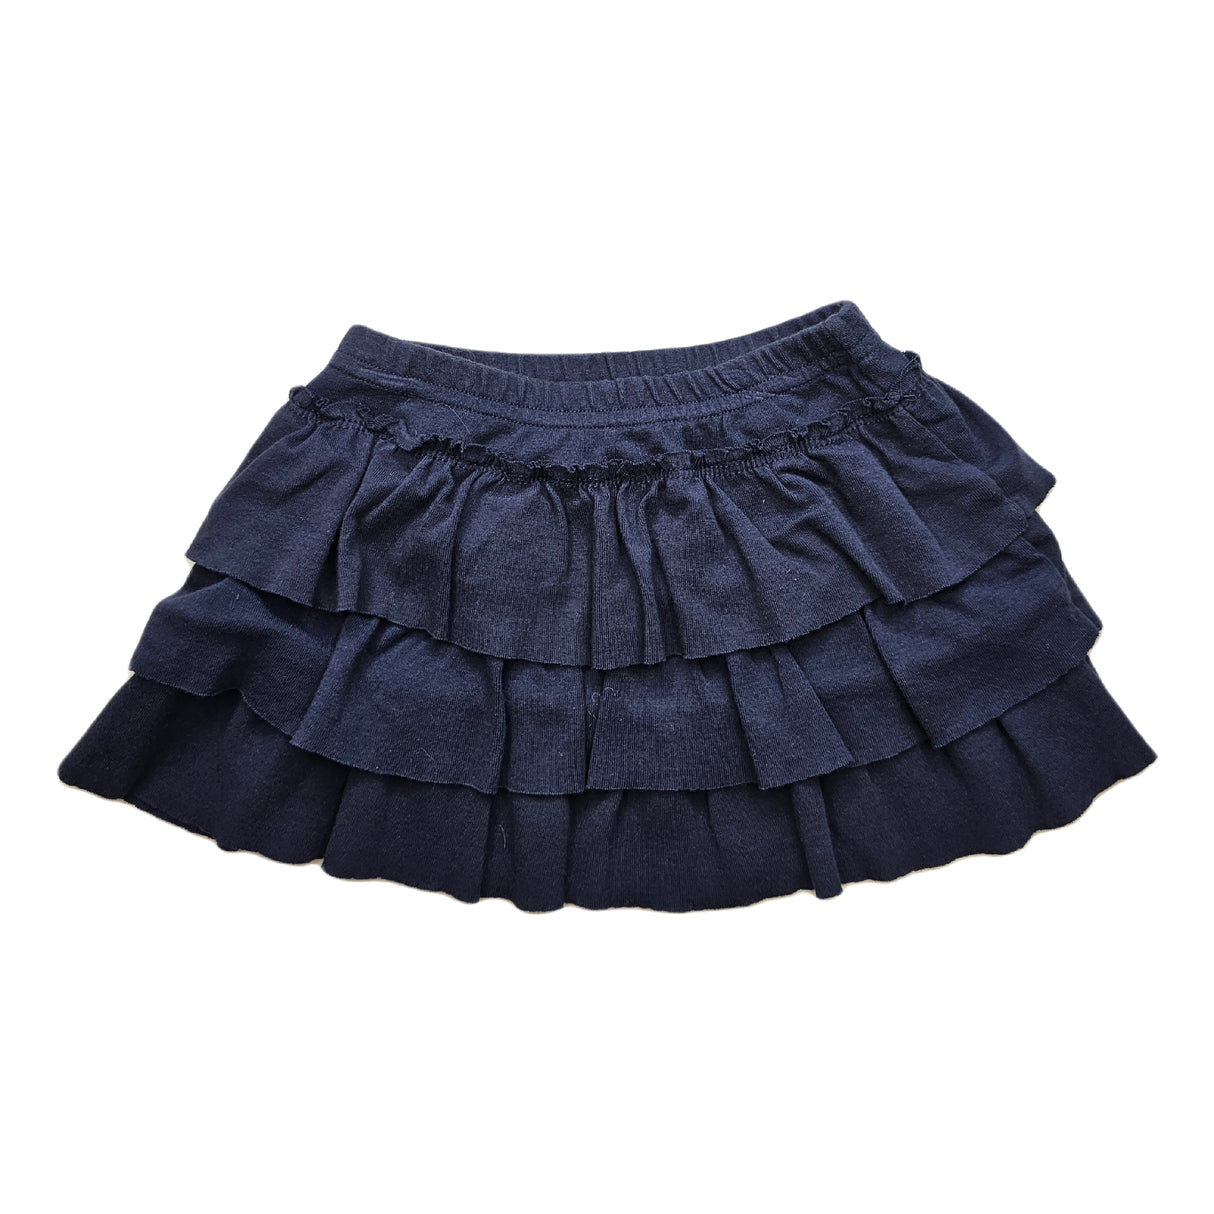 A Second Chance - Petit Bateau Skirt Kids - Delivery All Over Lebanon